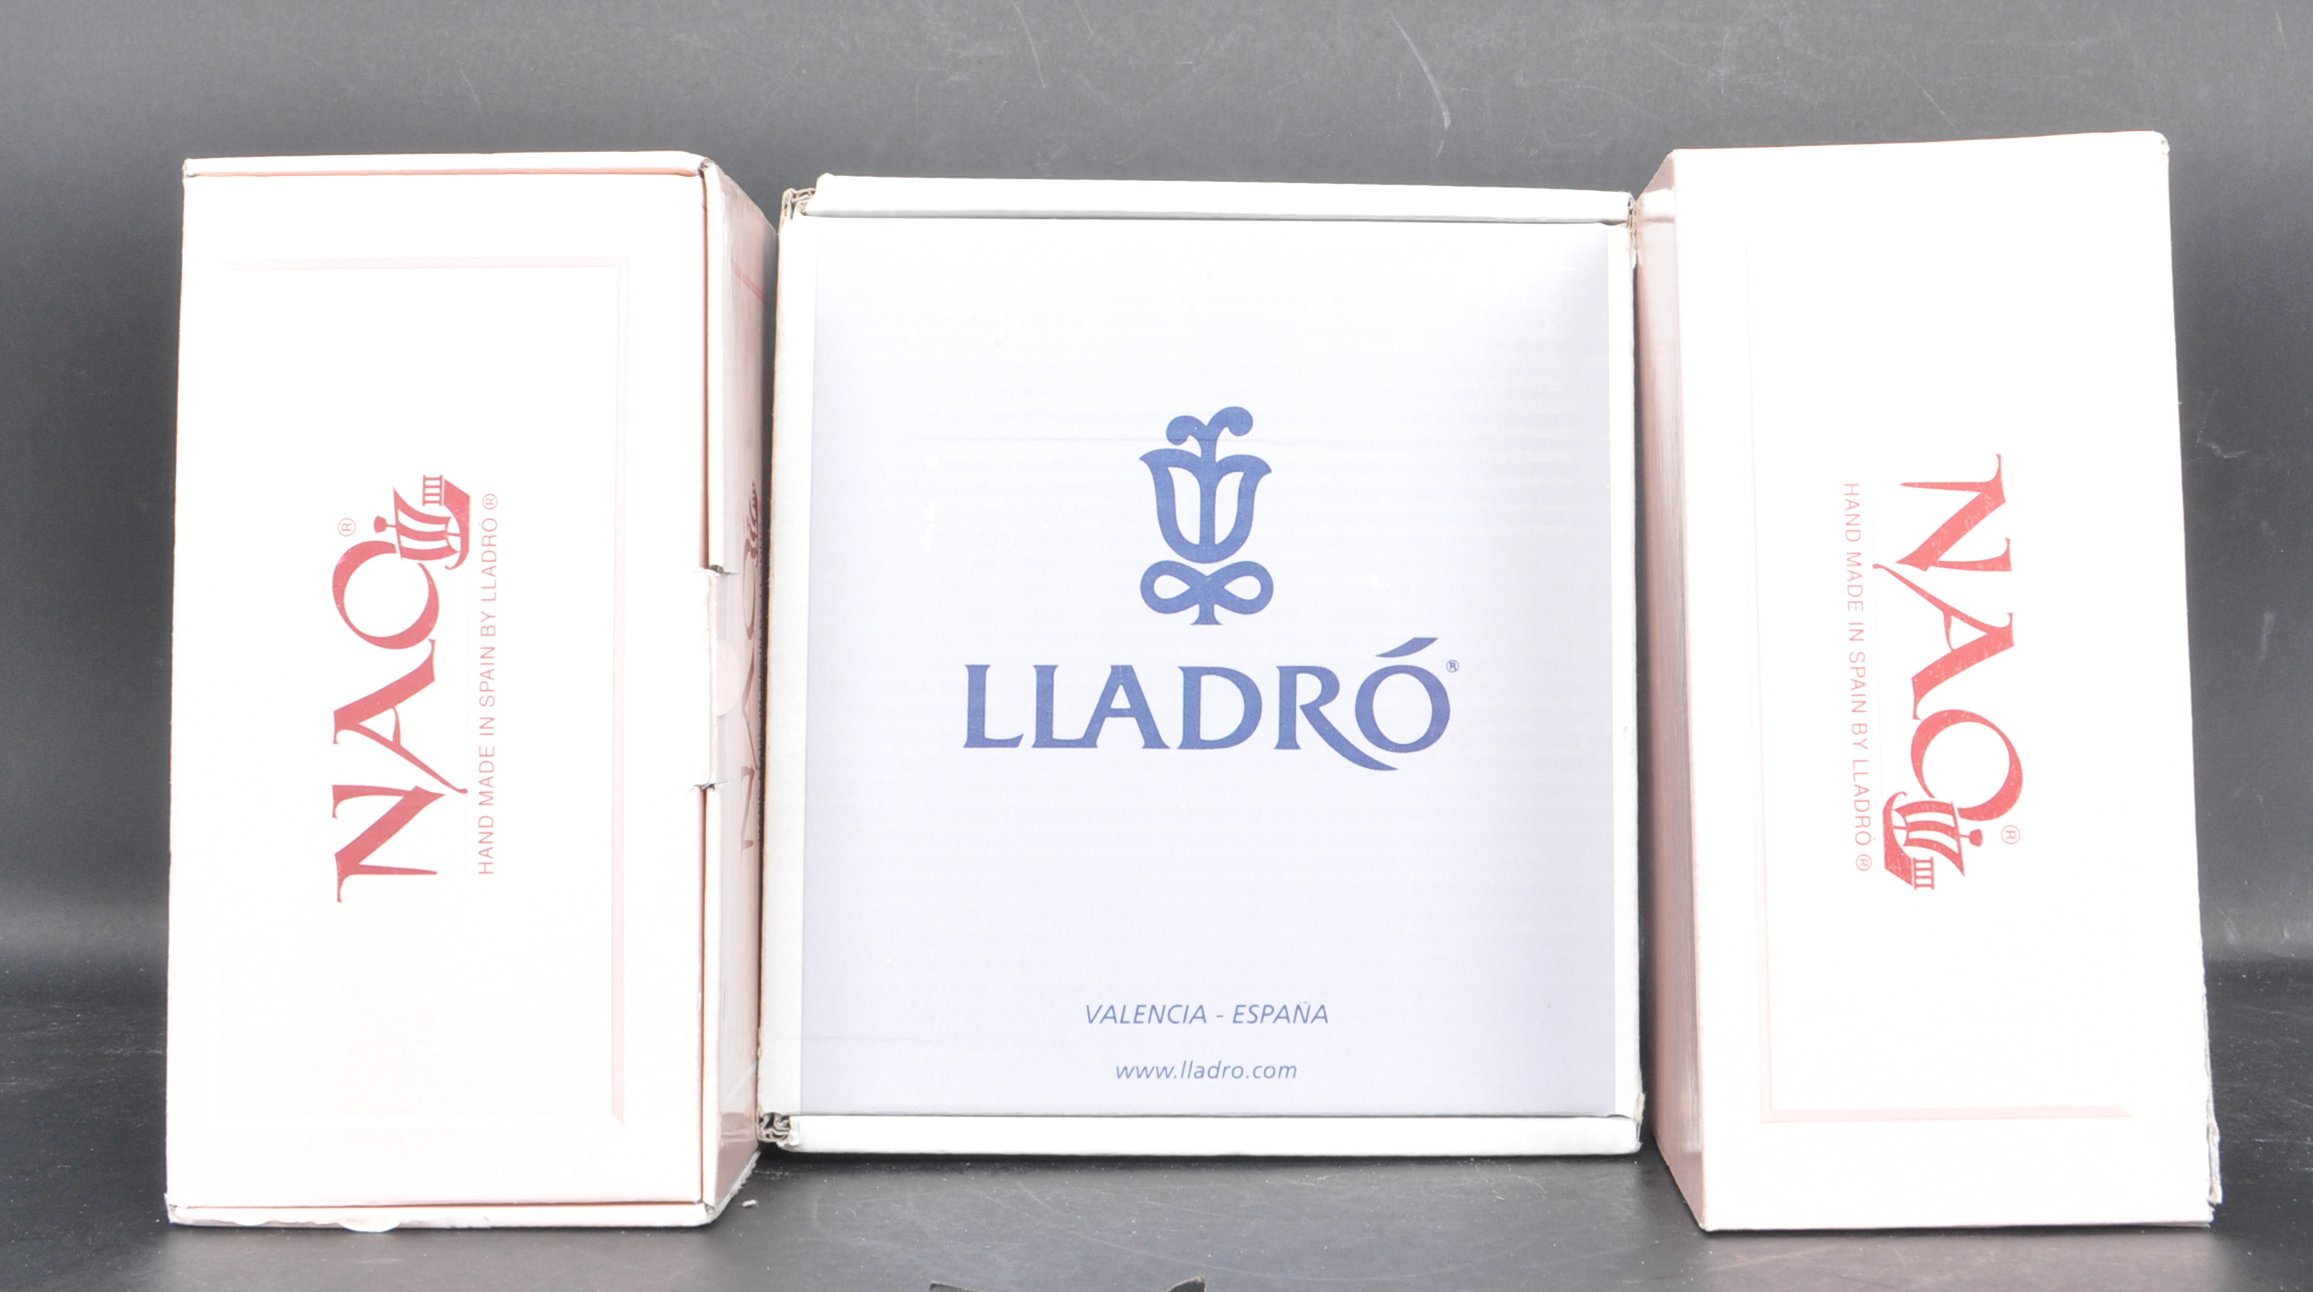 THREE NAO BY LLADRO CERAMIC PORCELAIN FIGURINES - 1110 - 1109 - 1316 - Image 7 of 7